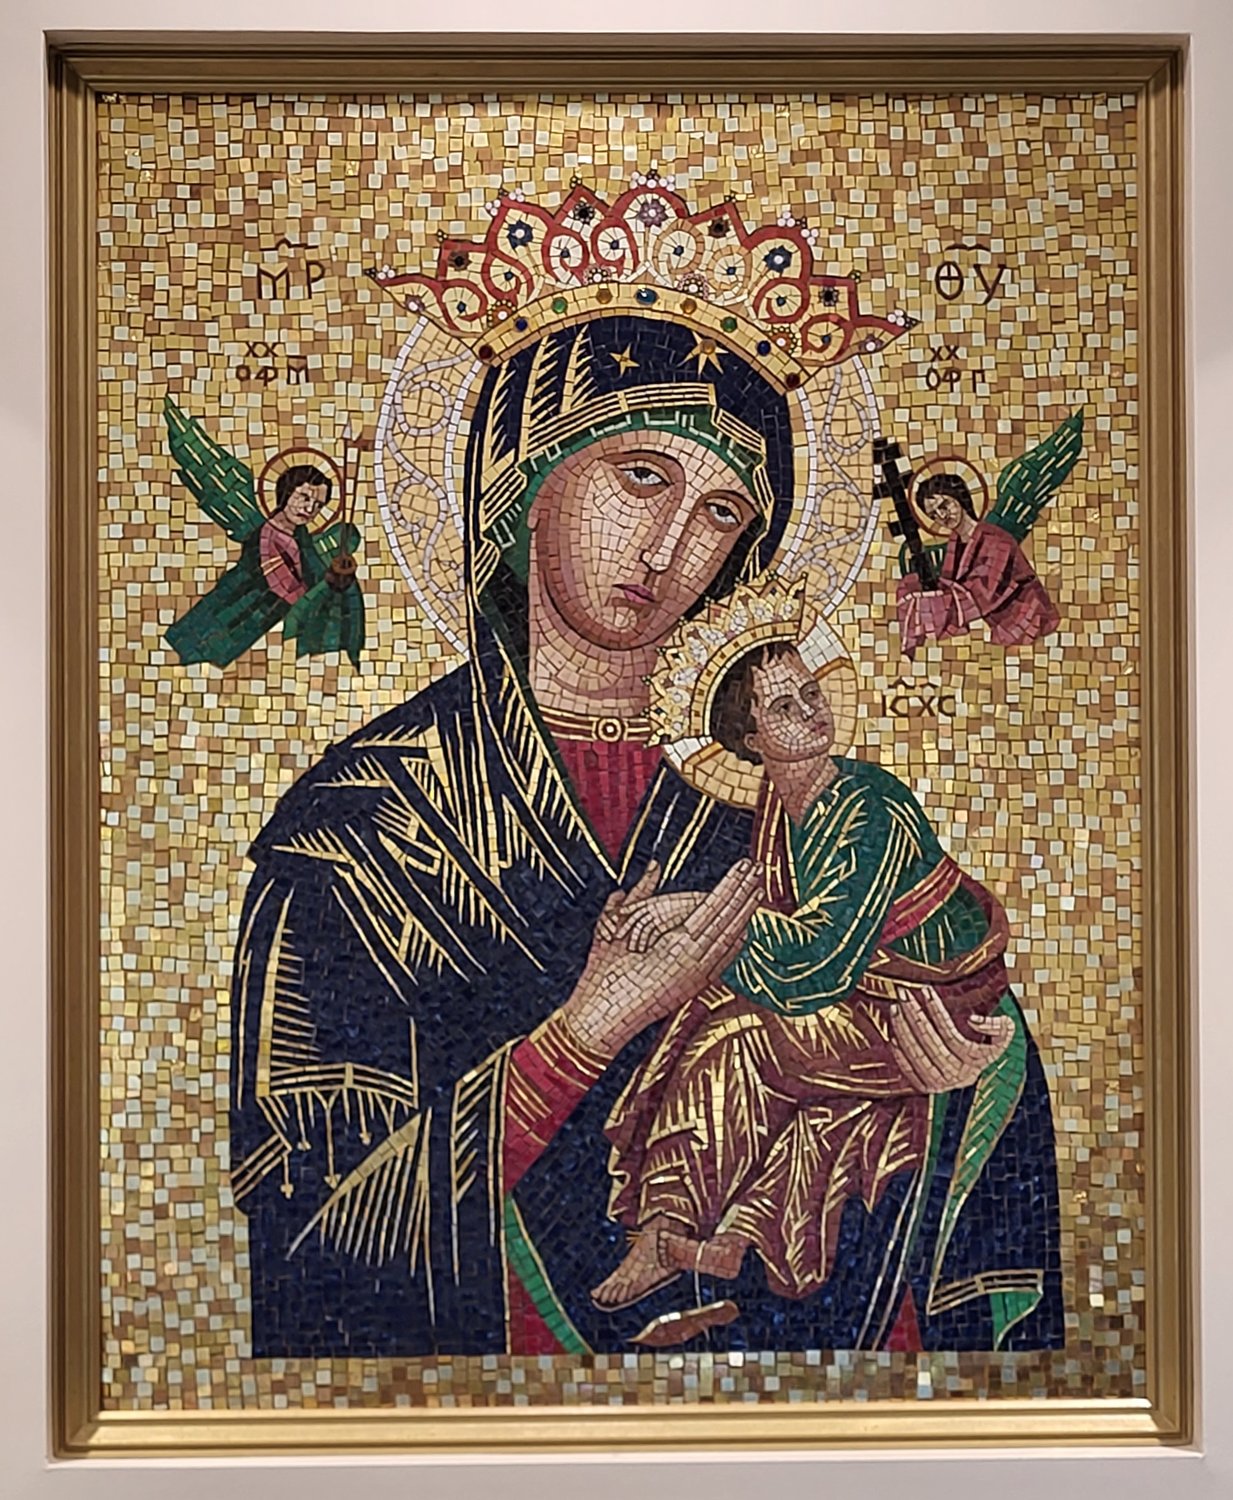 The a mosaic Our Lady of Perpetual Help, which adorned the Cathedral of St. Joseph for 43 years, now stands out brightly under new lights behind the reception desk in the Alphonse J. Schwartze Memorial Catholic Center in Jefferson City.